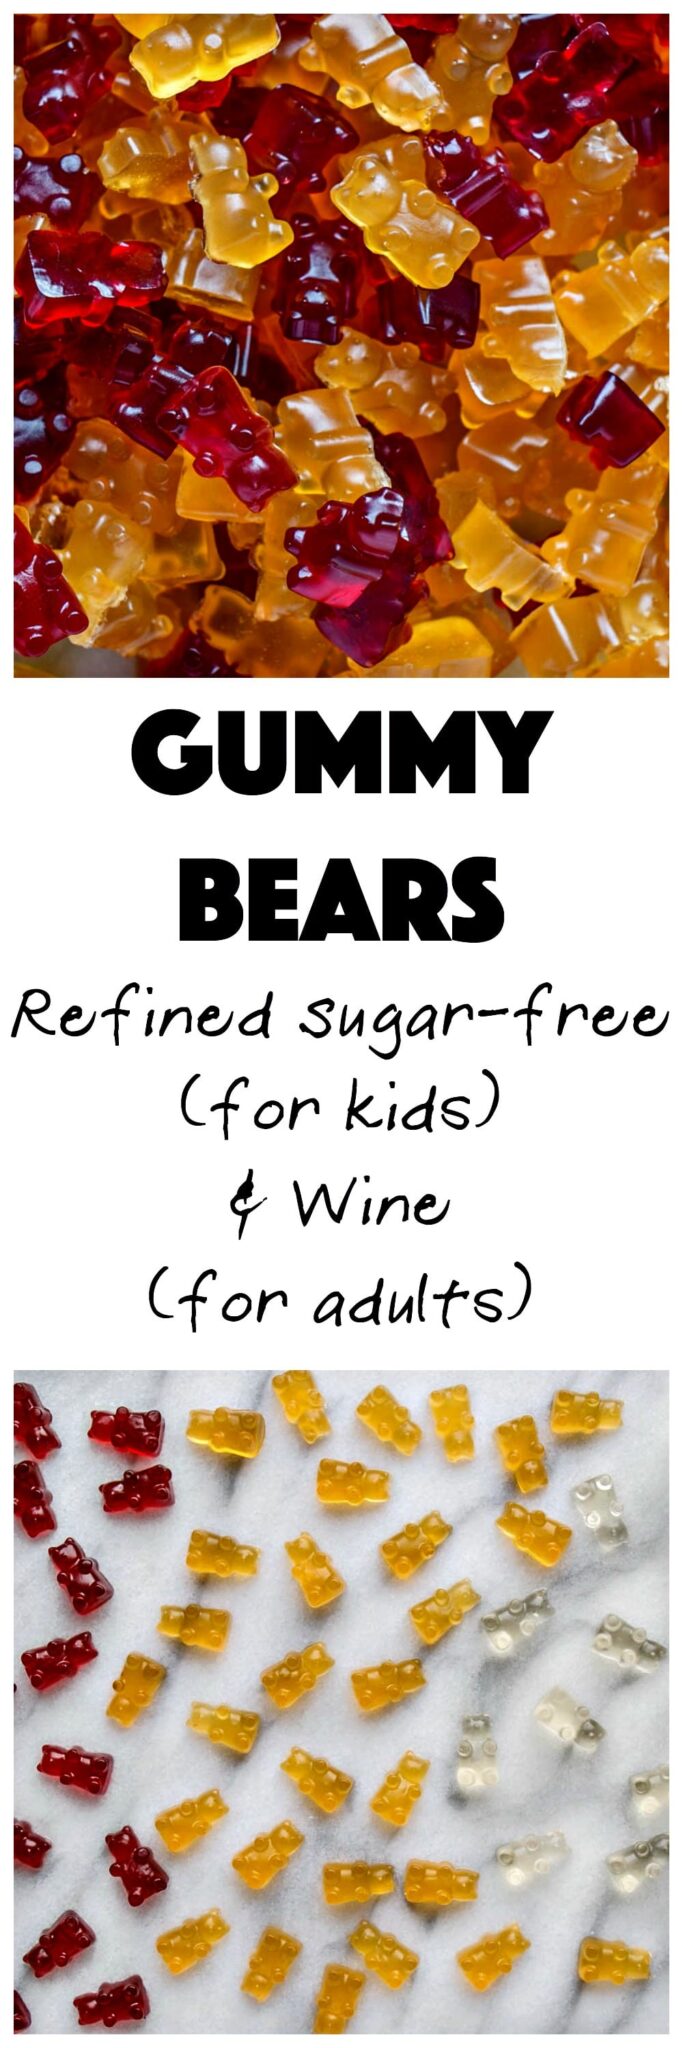 Healthier, refined sugar-free Gummy Bears!! Plus, a wine version for mom! This easy and healthier Gummy Bears recipe is a perfect treat for kids. via @mykitchenlove